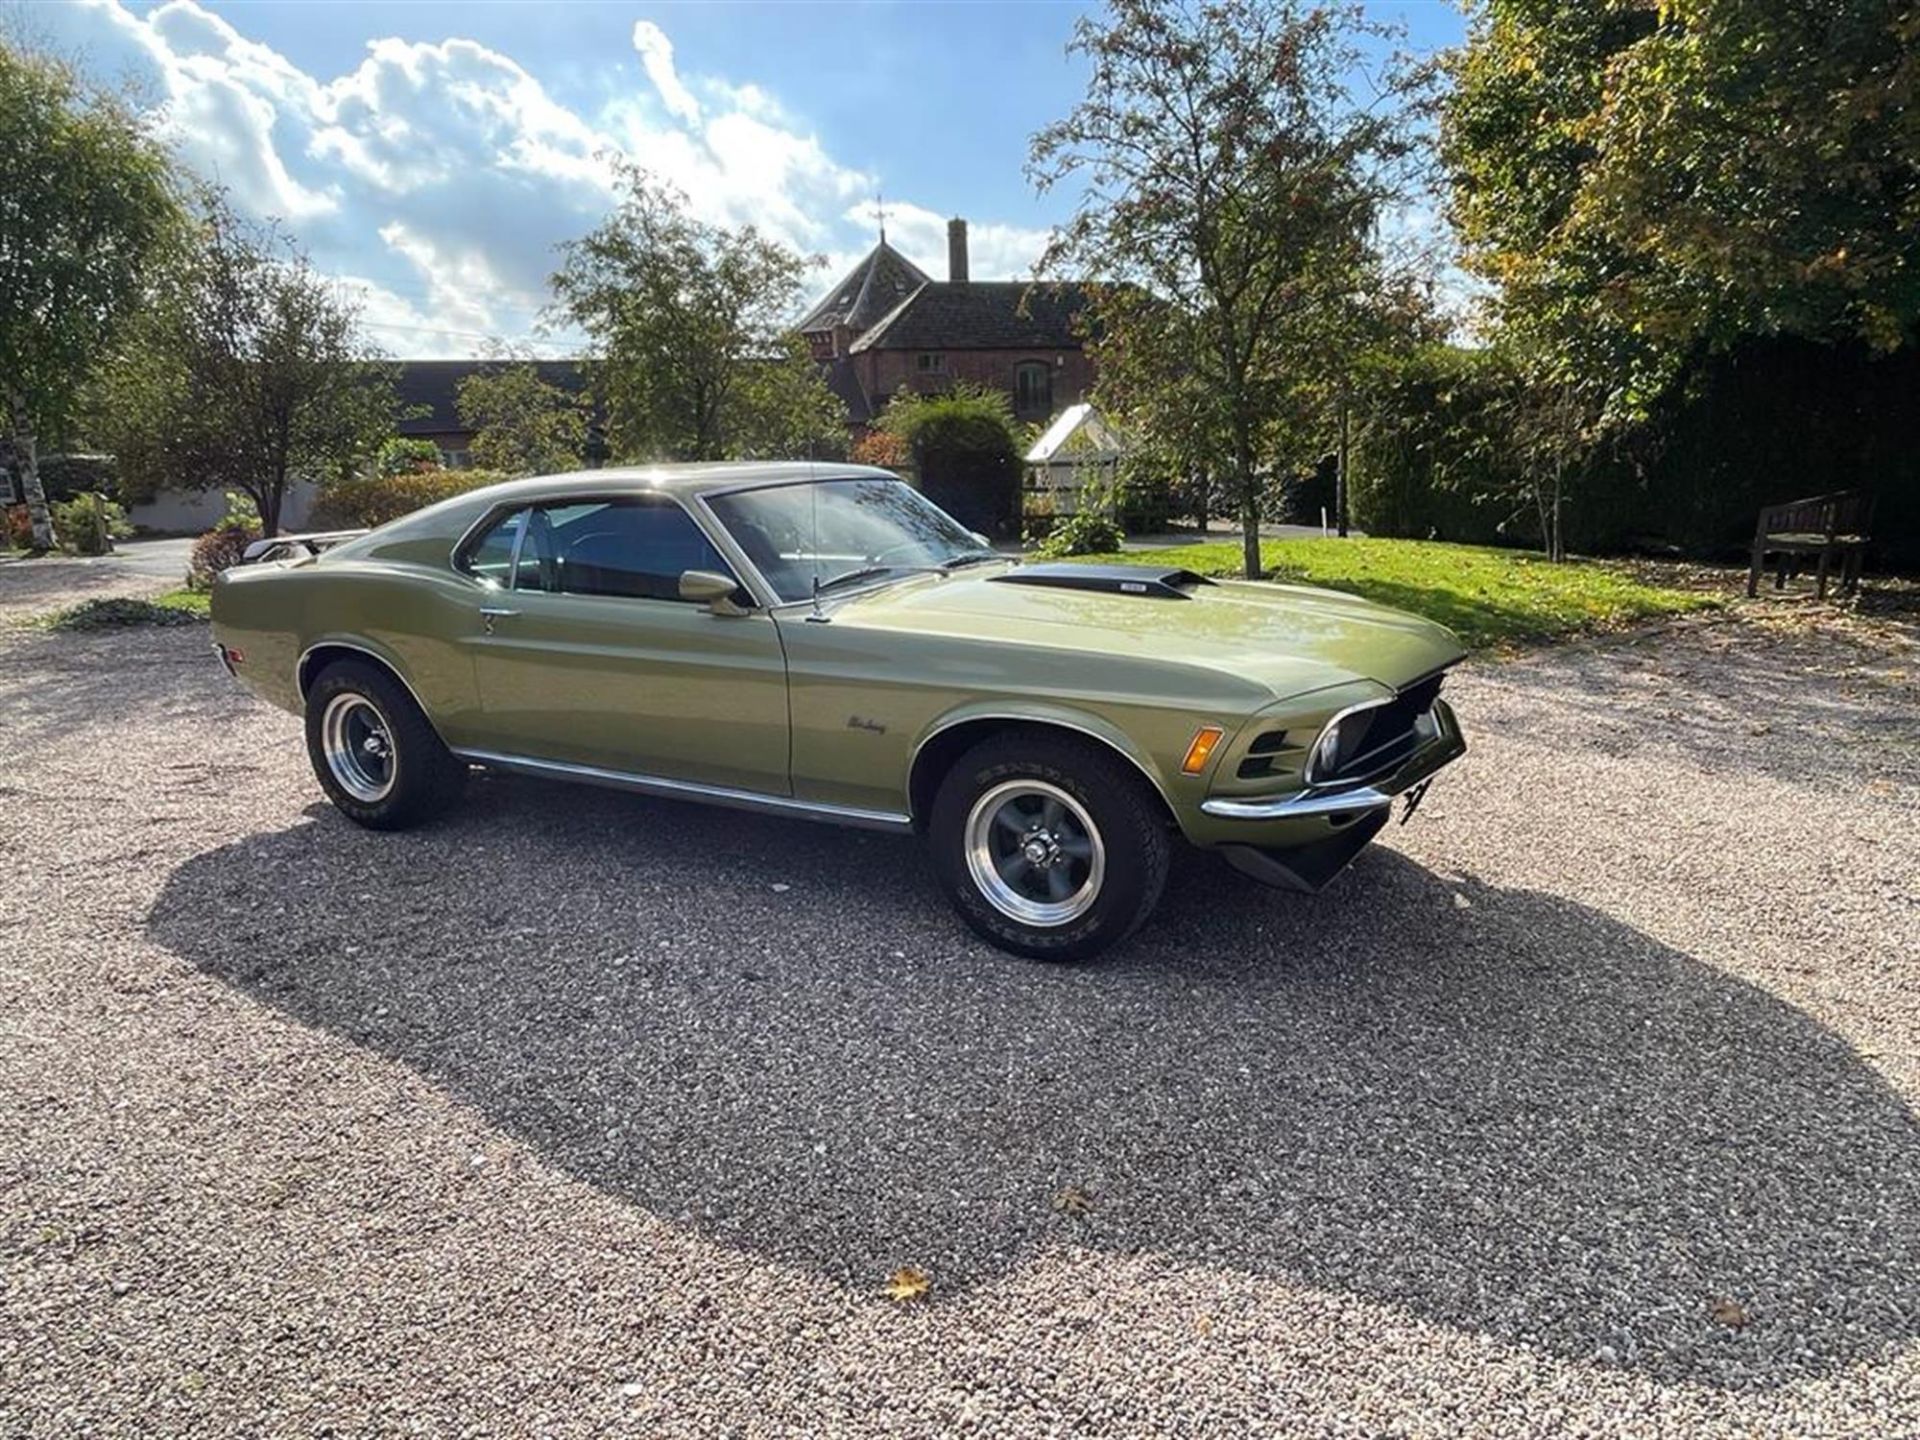 1970 Ford Mustang Fastback - Image 9 of 10